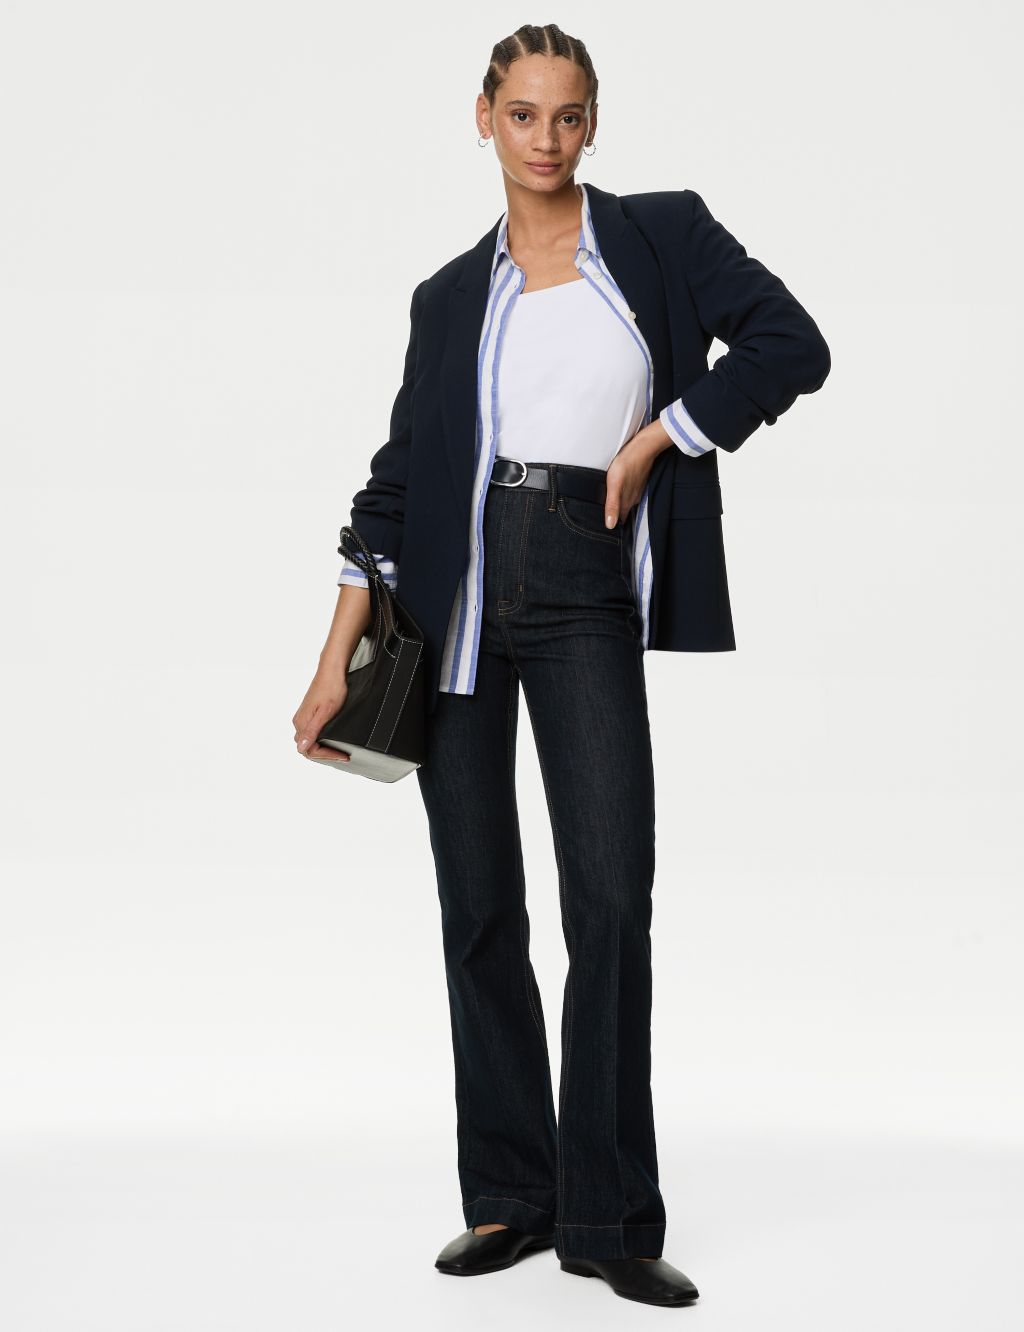 Relaxed Ruched Sleeve Blazer image 1